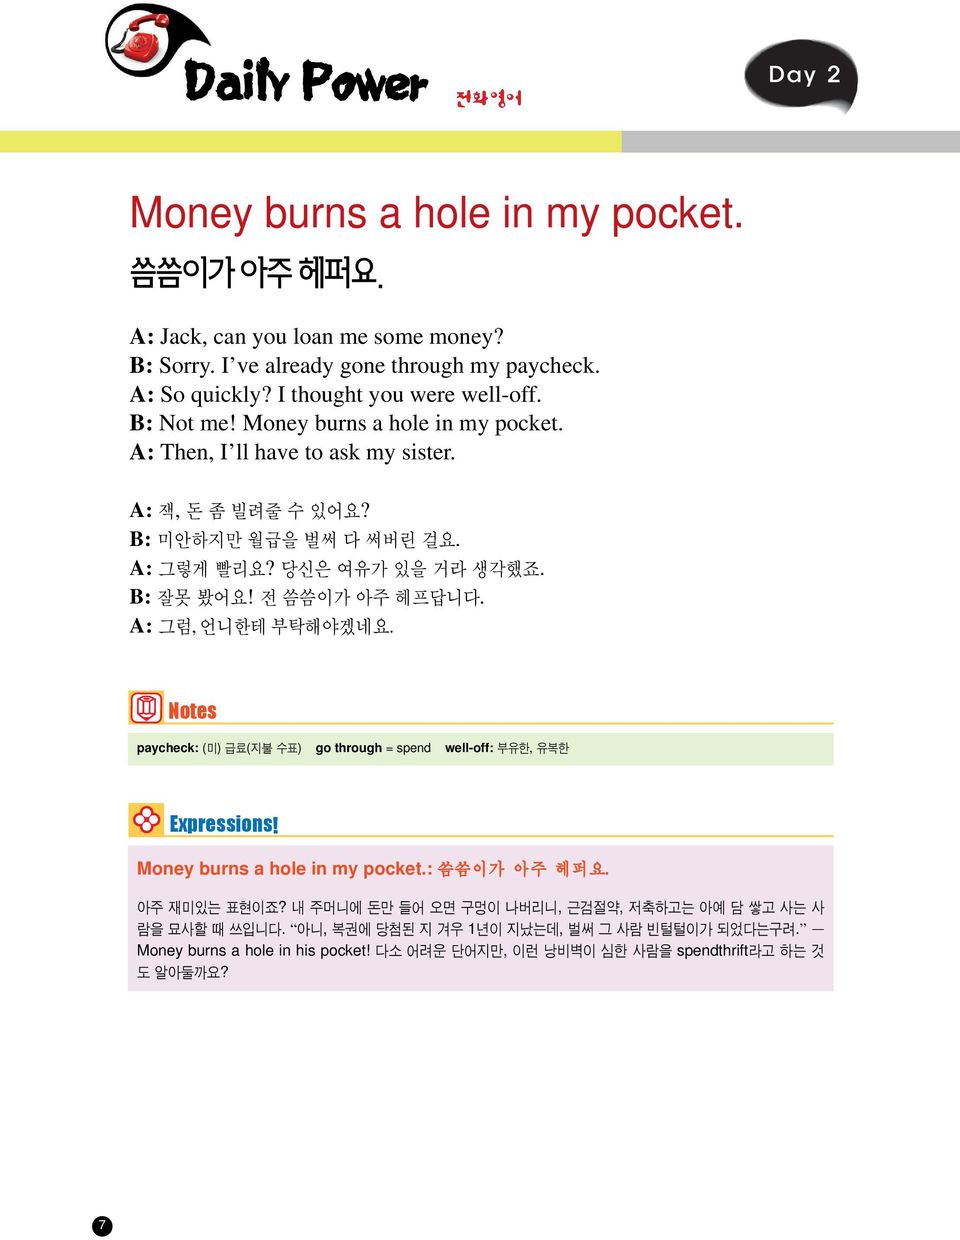 Money burns a hole in my pocket. : Then, I ll have to ask my sister. :,?